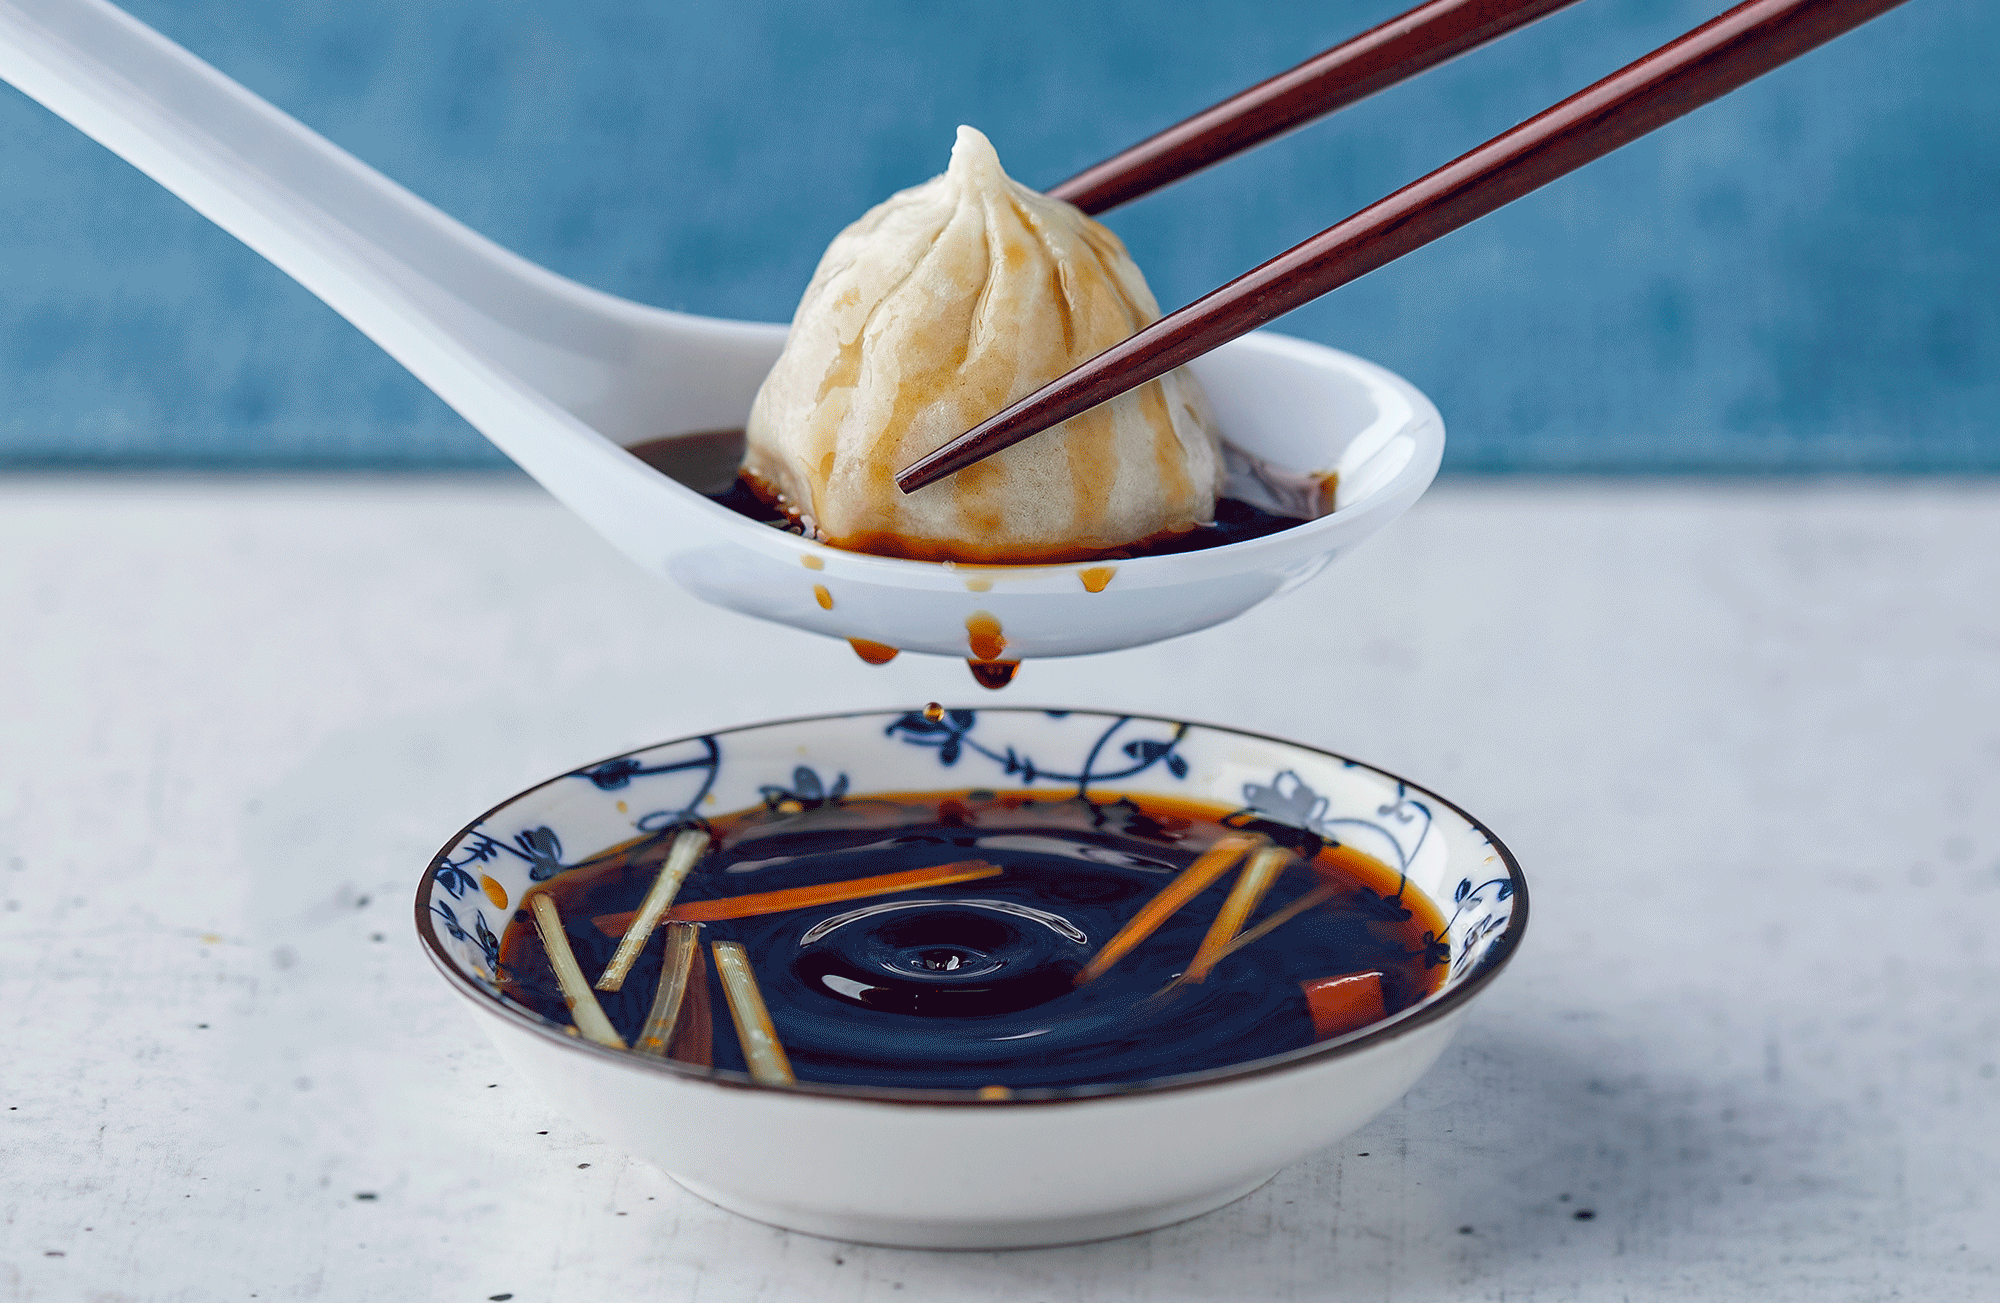 Marlin Connections Products and Services: Dumpling being dipped in sauce